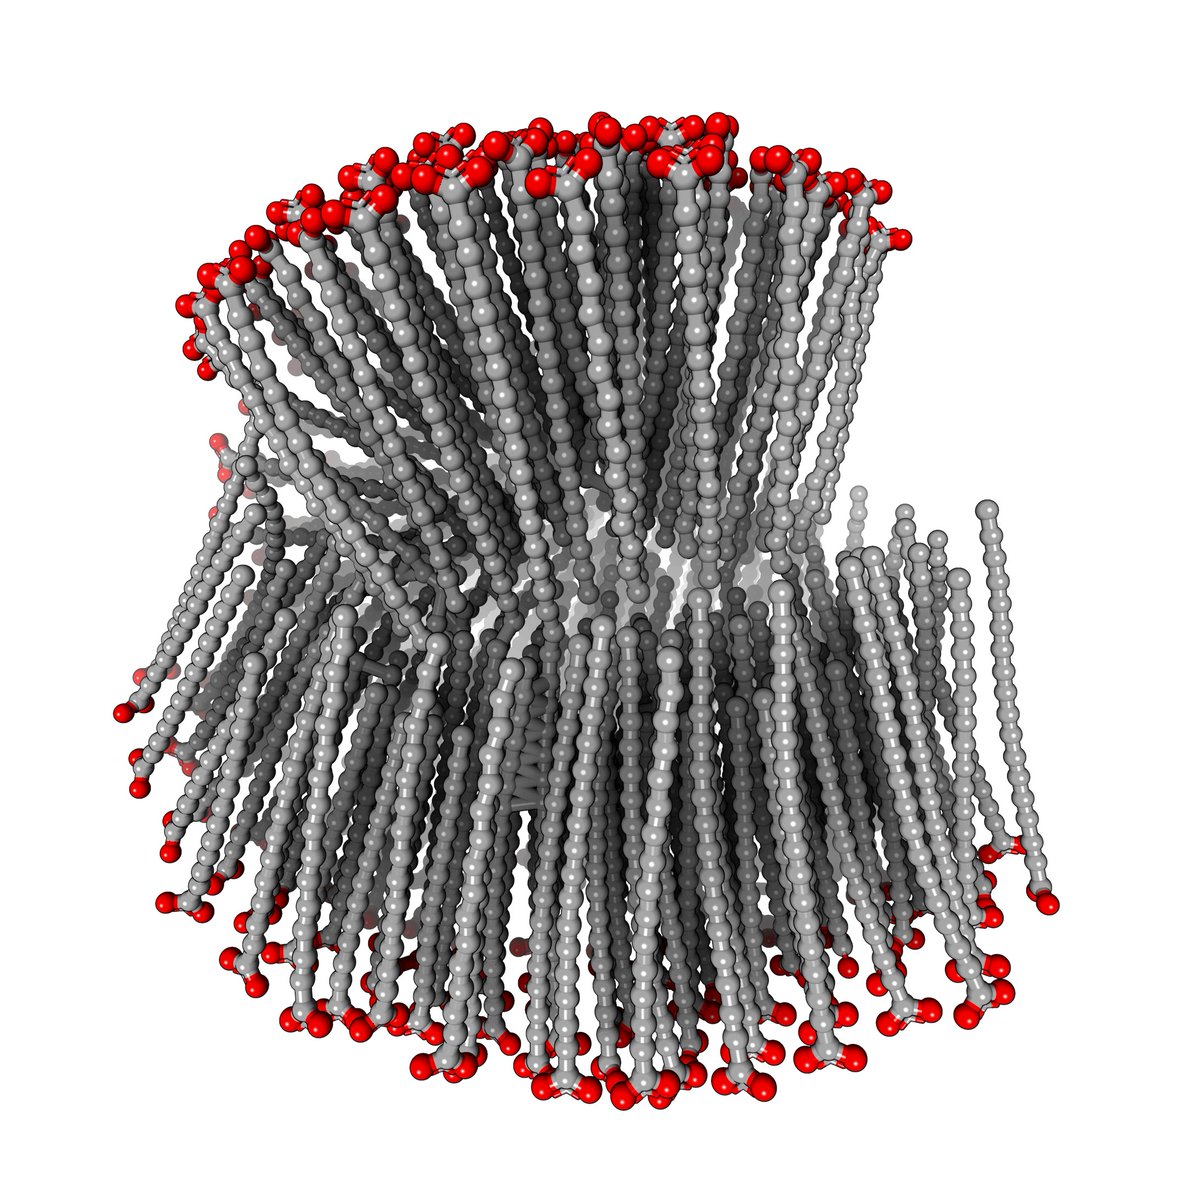 Using 250 lipids as input, @alphafold3 produces very interesting output, including a micelle, with quite rigid conformations of lipids. #scivis #lipids #micelle @proteinimaging